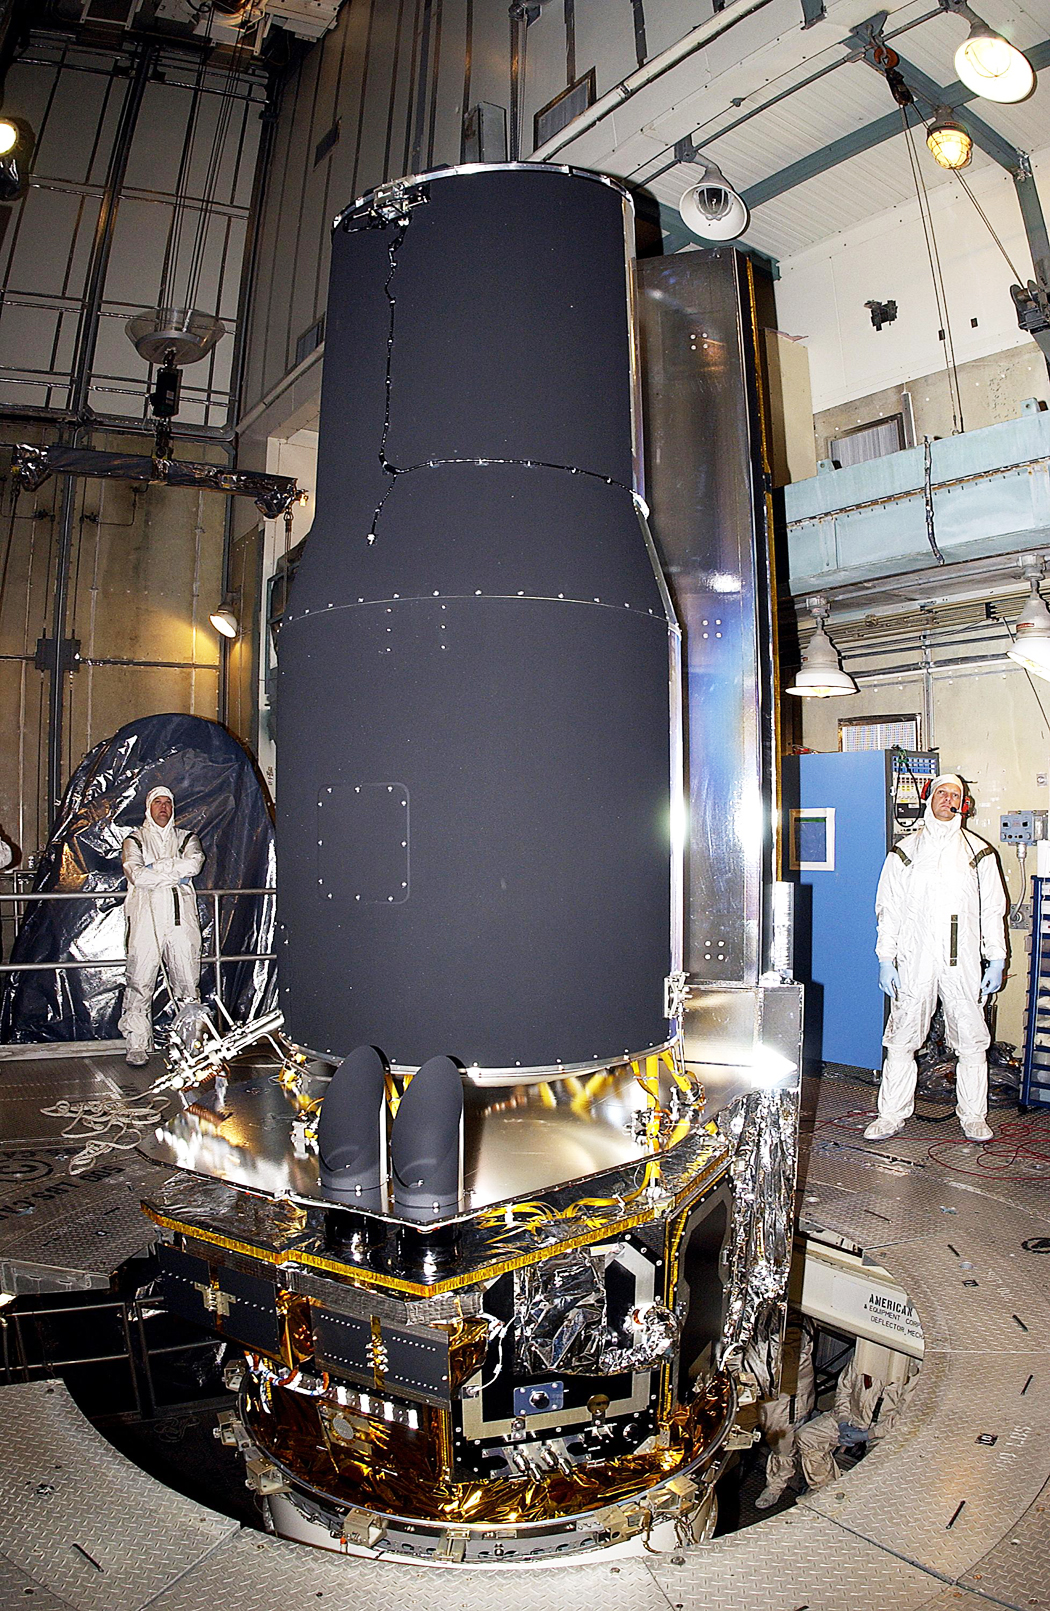 The Spitzer Space Telescope is prepared for launch with a couple of workers looking on.